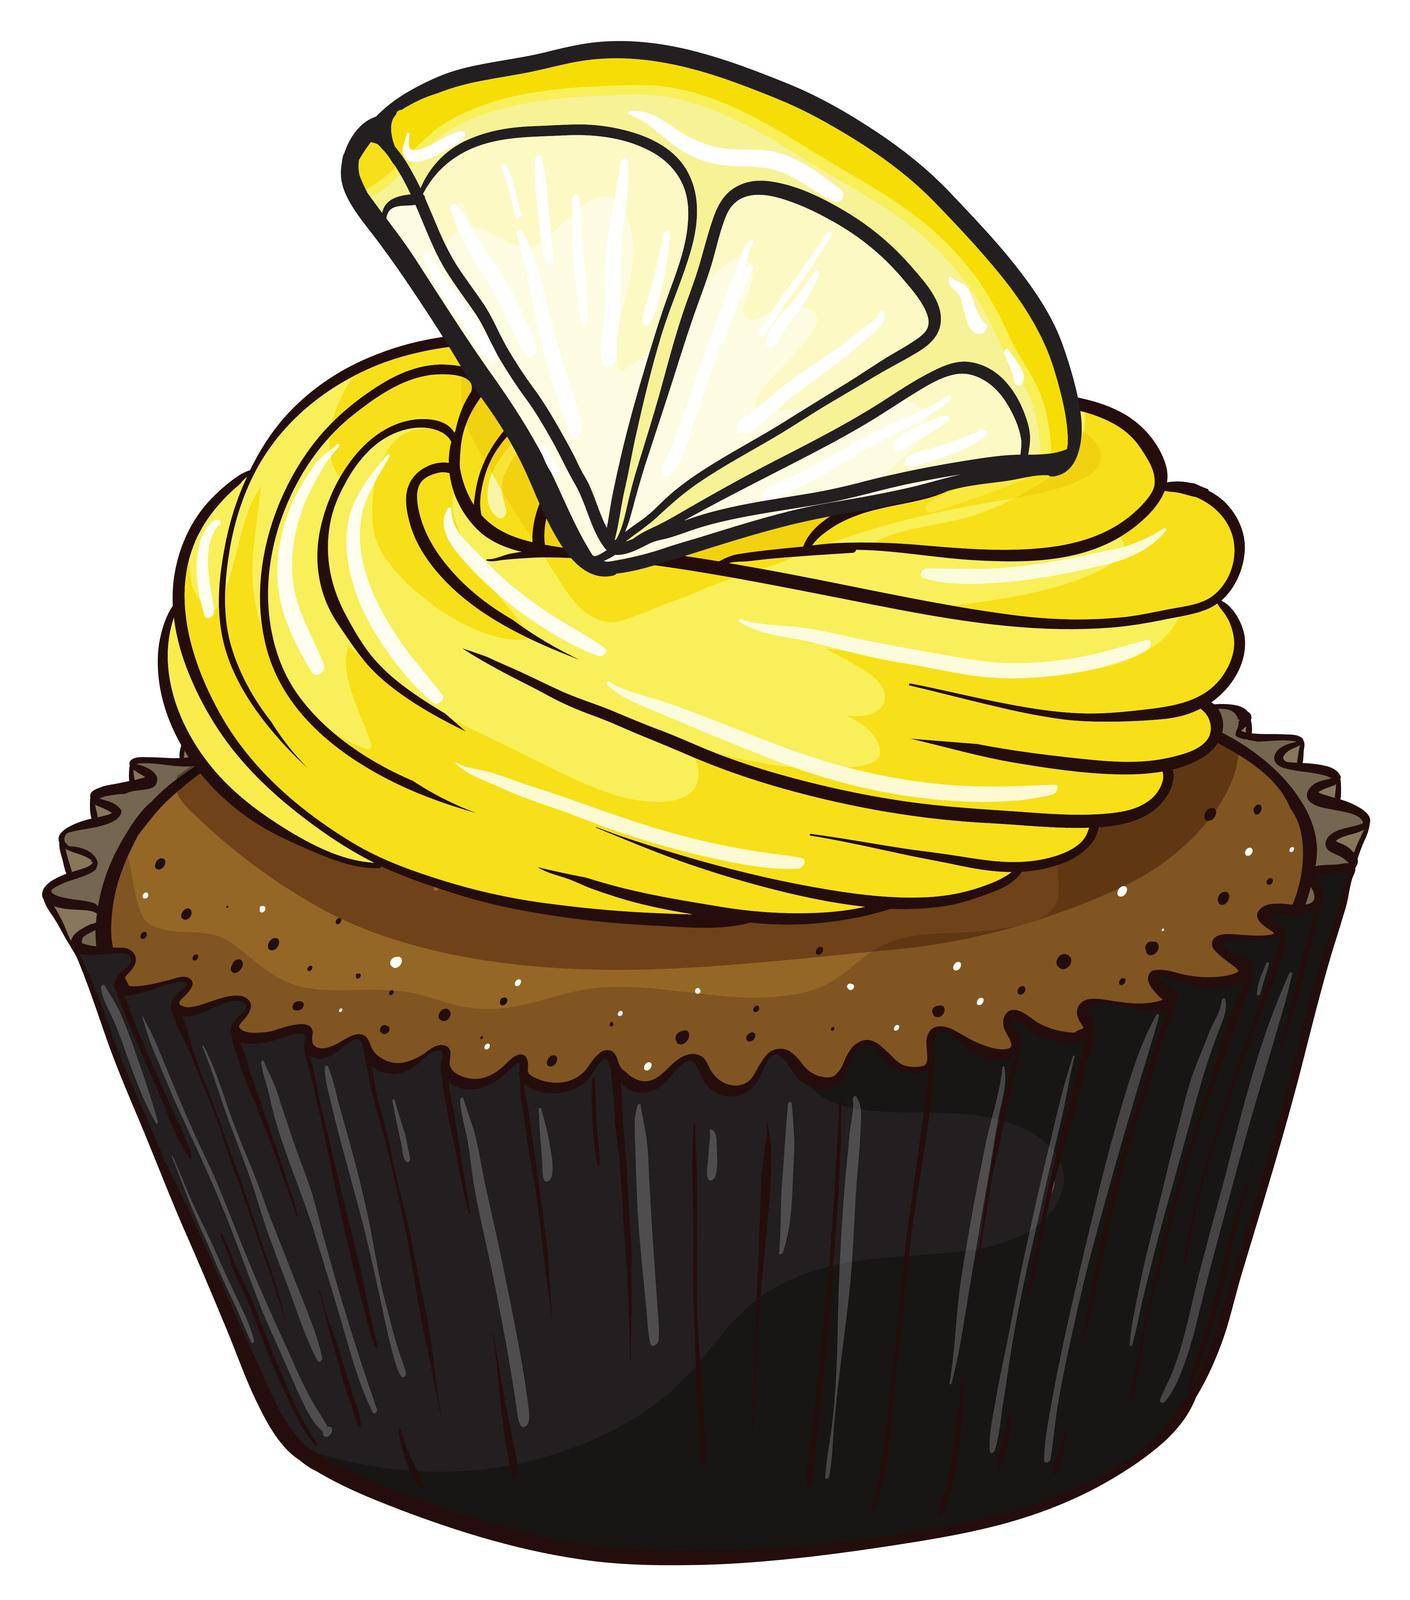 Illustration of an isolated cupcake